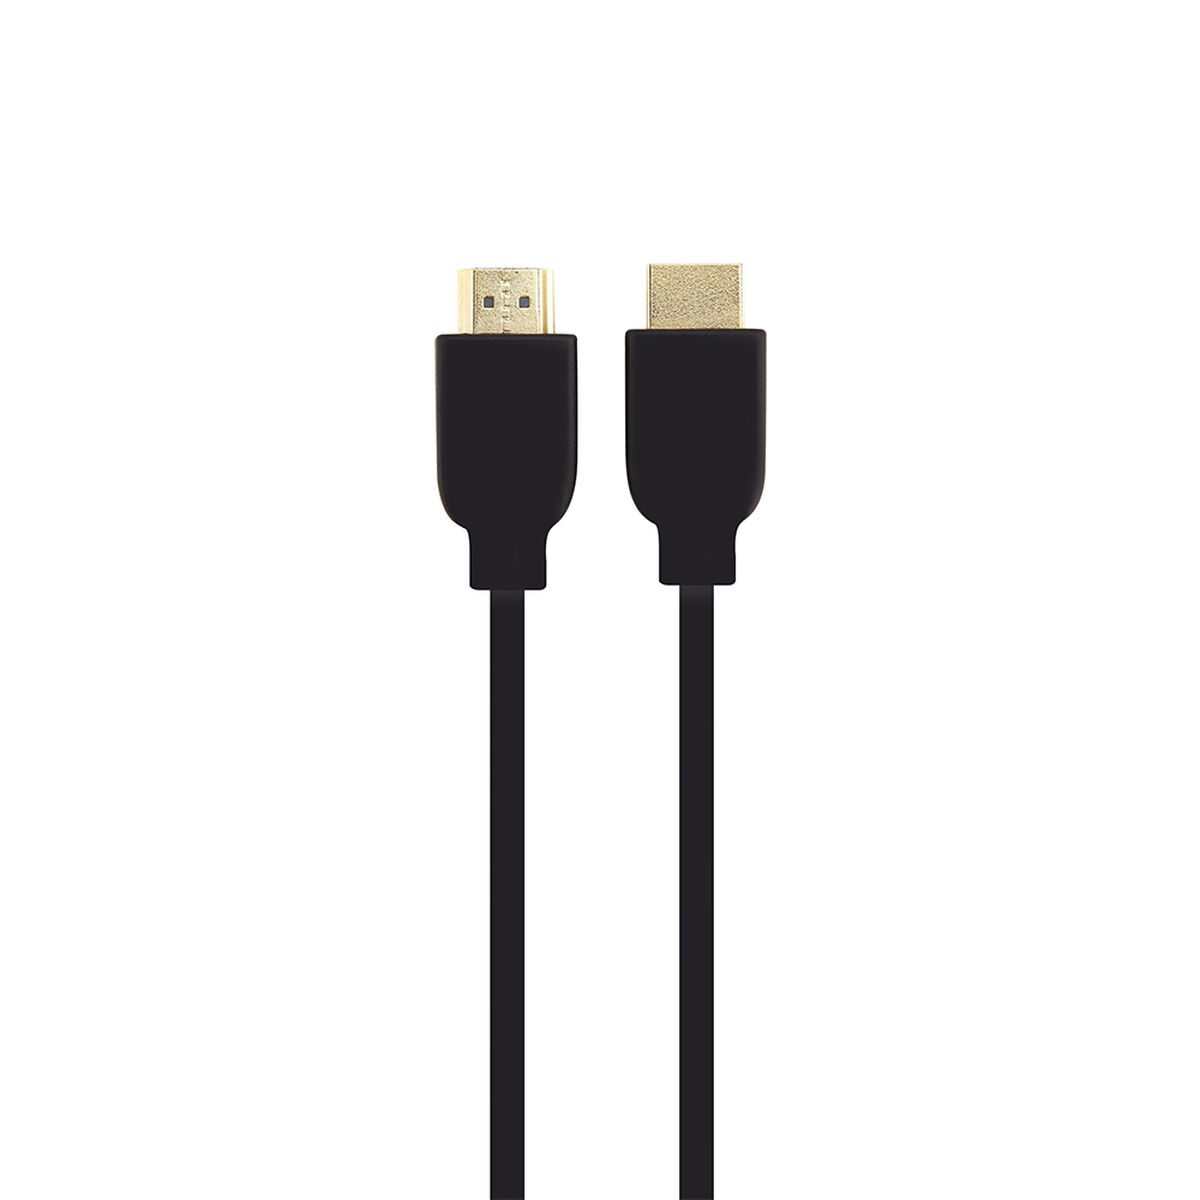 Cable HDMI Philips 79PHL1436N SWV1436BN 1,8 mts.